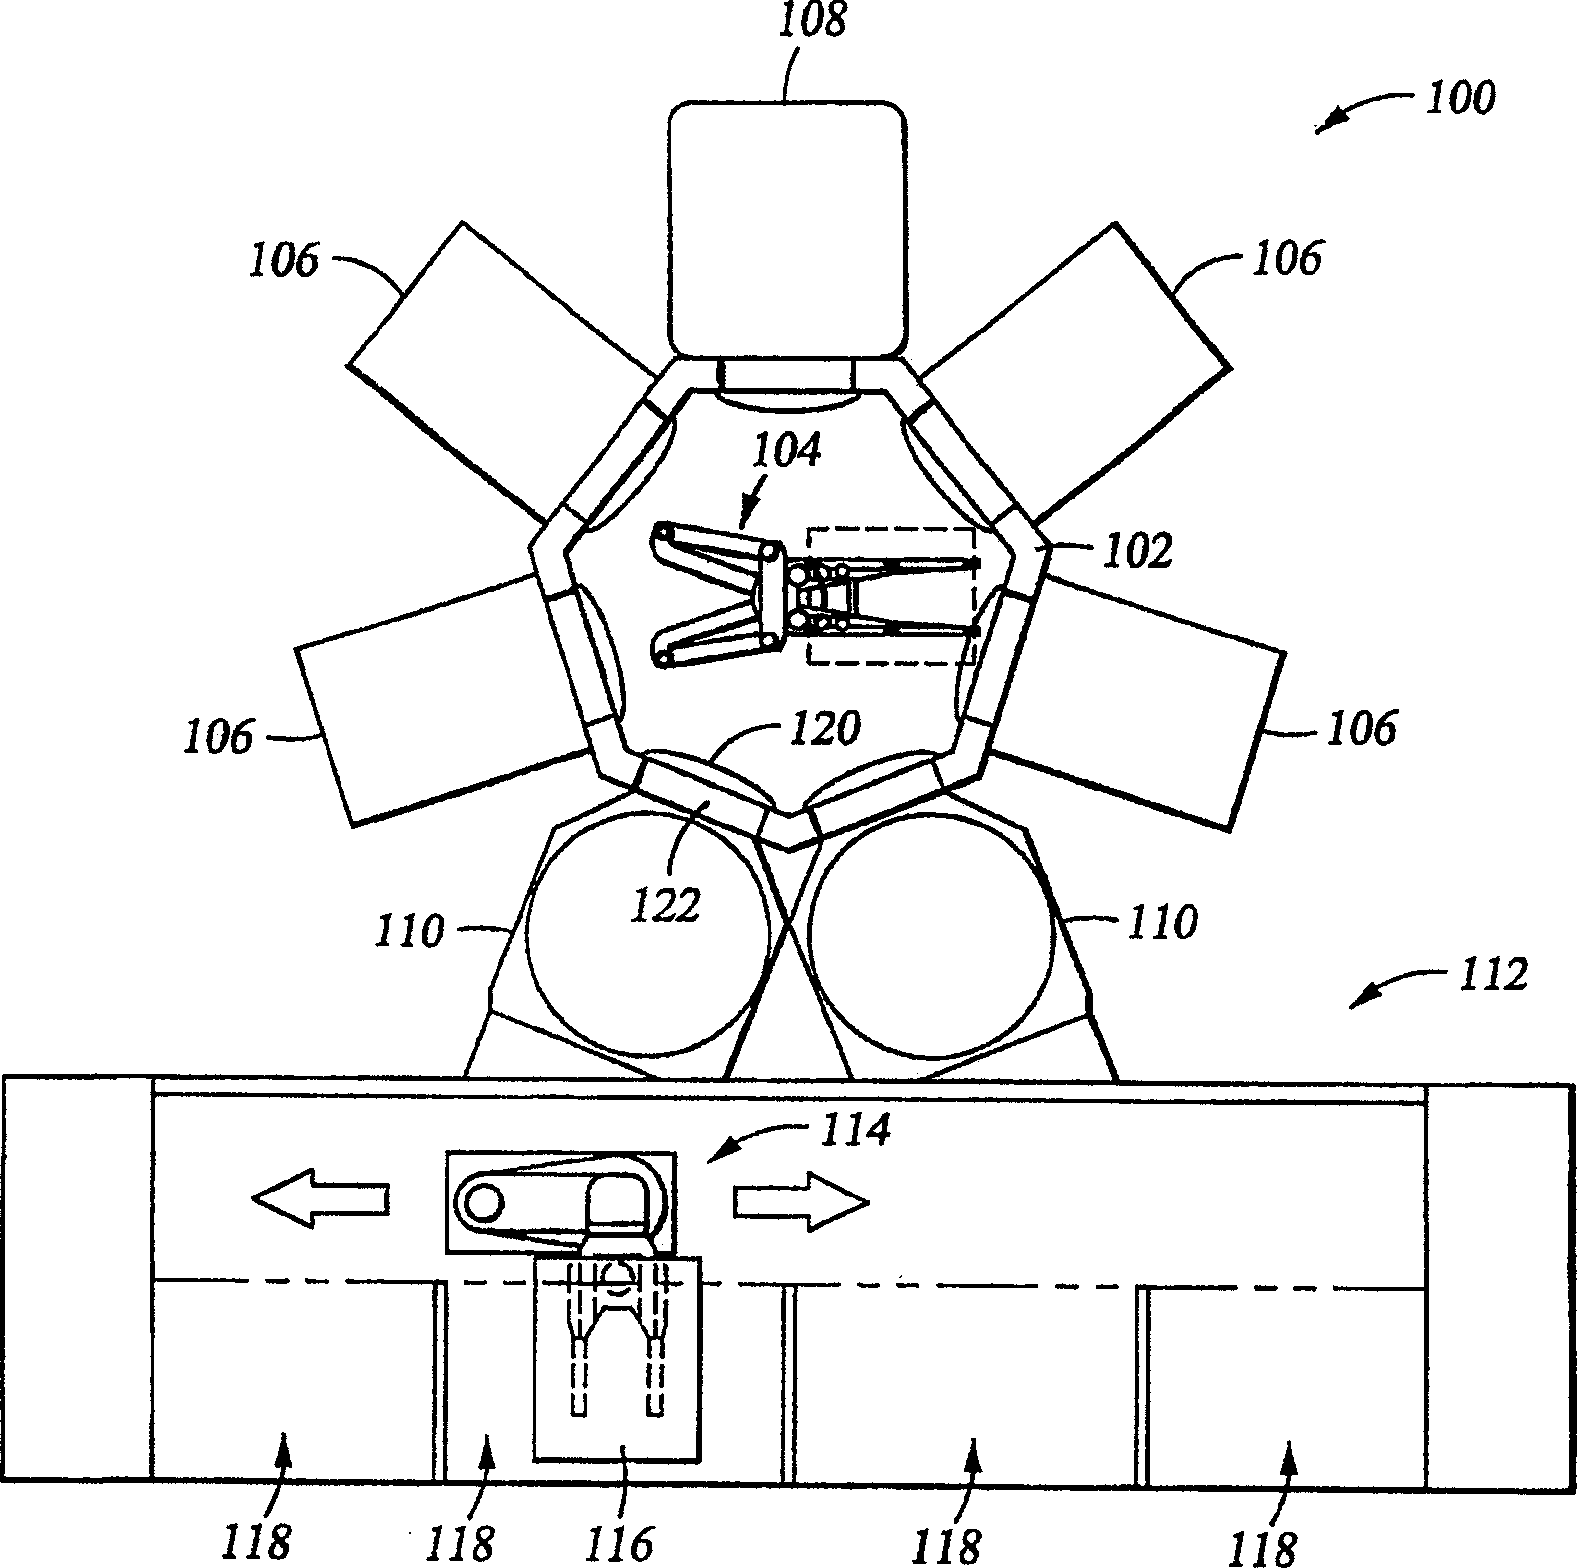 End effector assembly for supporting substrates